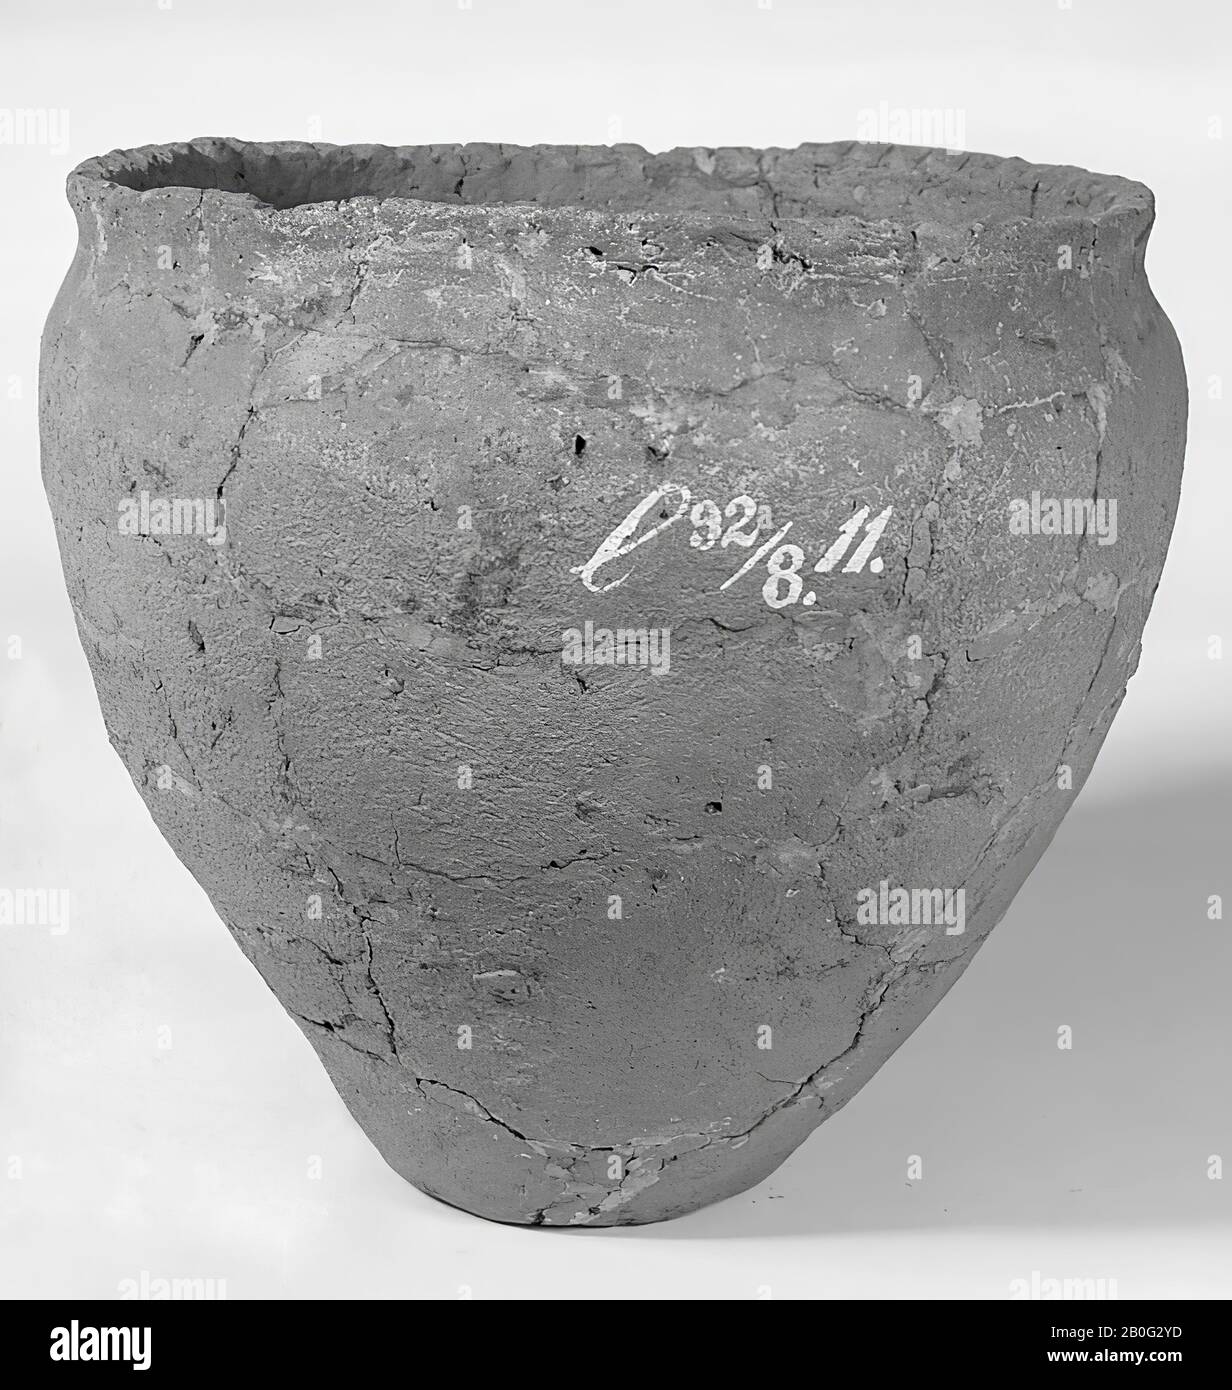 Germanic cartel edge of earthenware. Old bonding. Contains cremated residues, urn, earthenware, h: 21 cm, diam: 22.8 cm, prehistory -800 Stock Photo